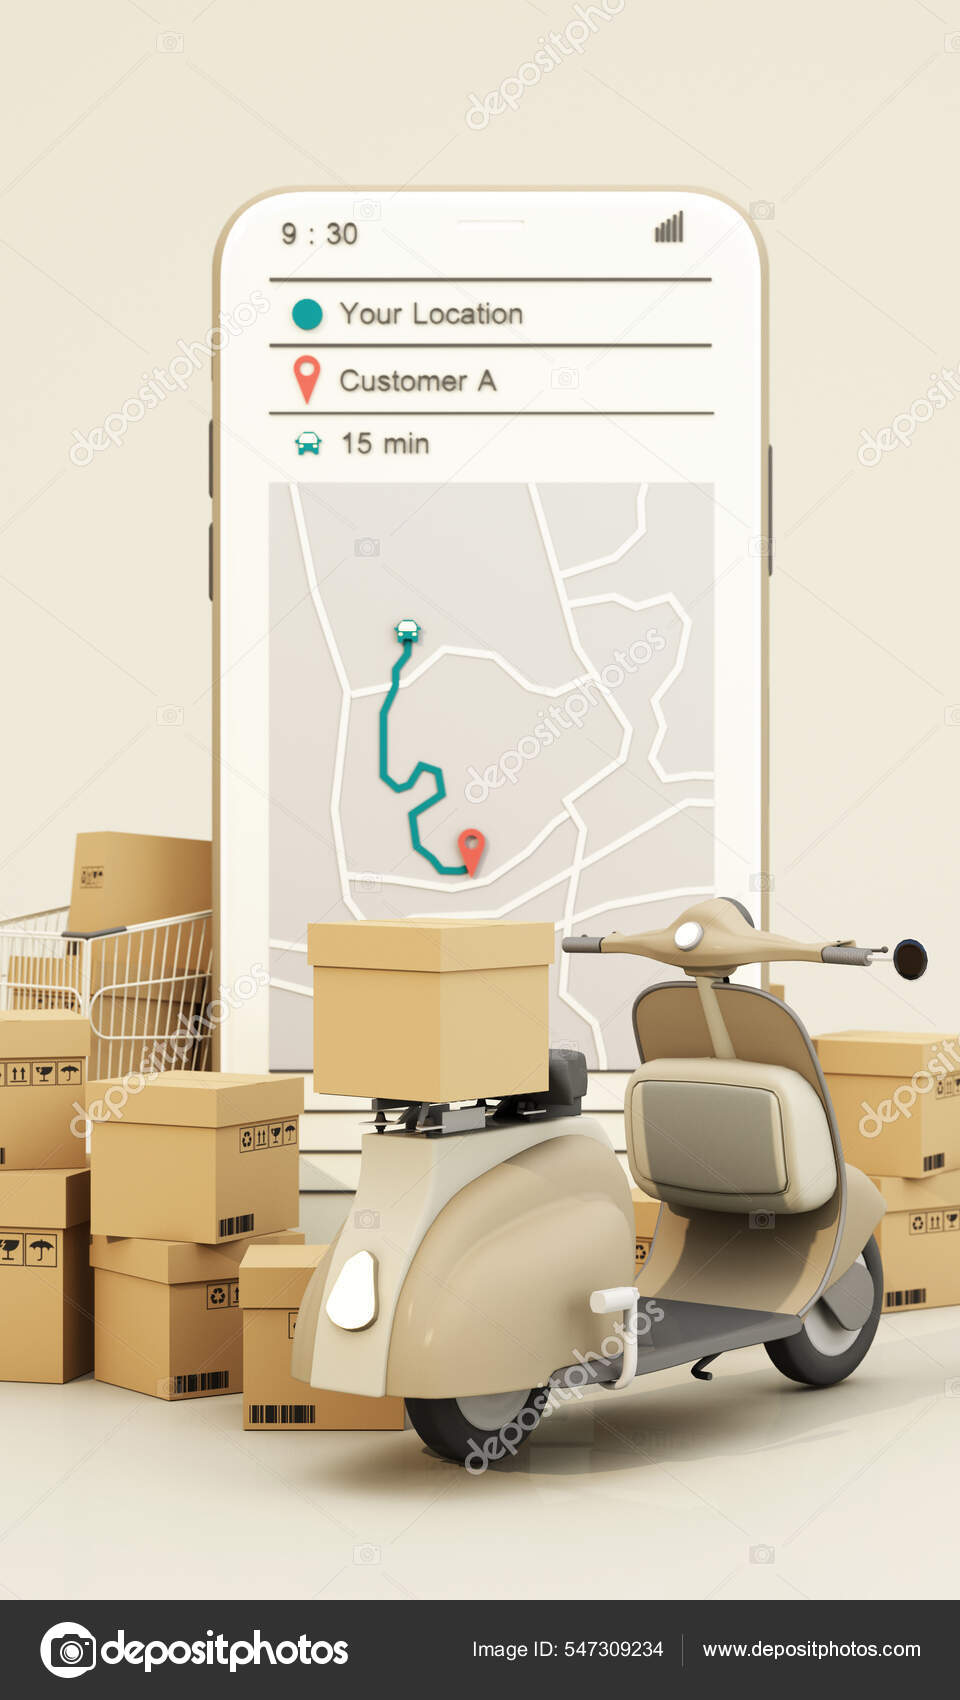 Fast Delivery Scooter Bike Van Mobile Commerce Concept Online Food Stock Photo by ©phiwath.j@gmail 547309234